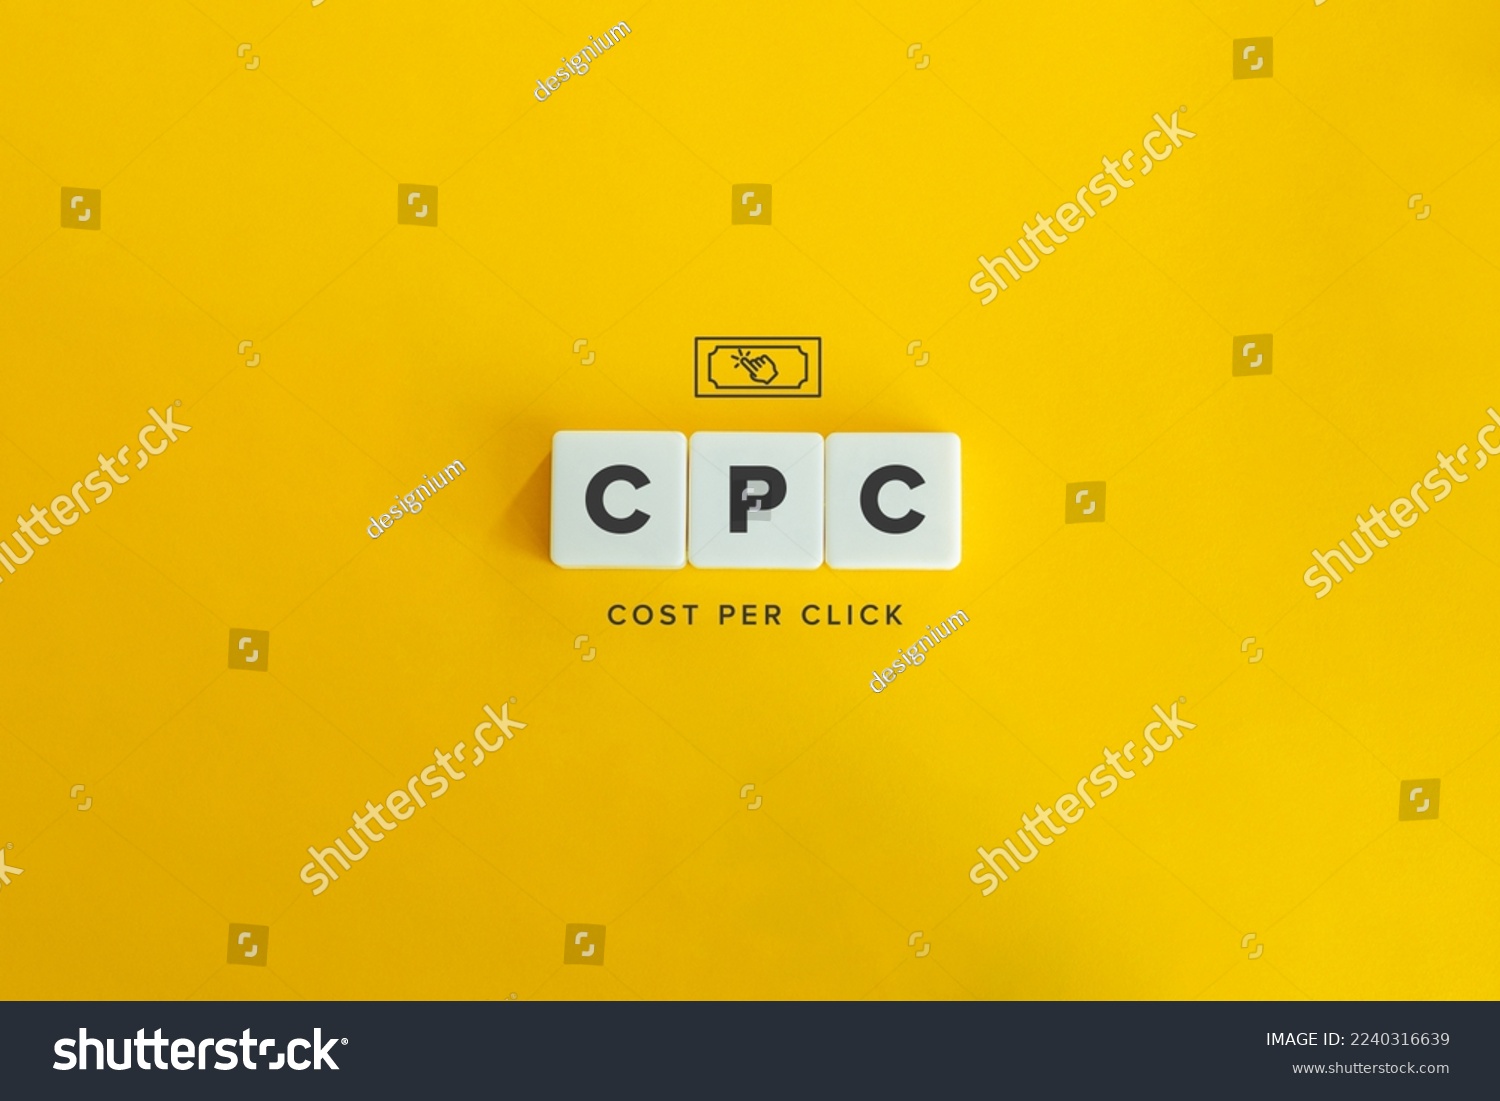 Cost Per Click (CPC) Banner and Icon. Block letters on yellow background. Minimal aesthetics. #2240316639